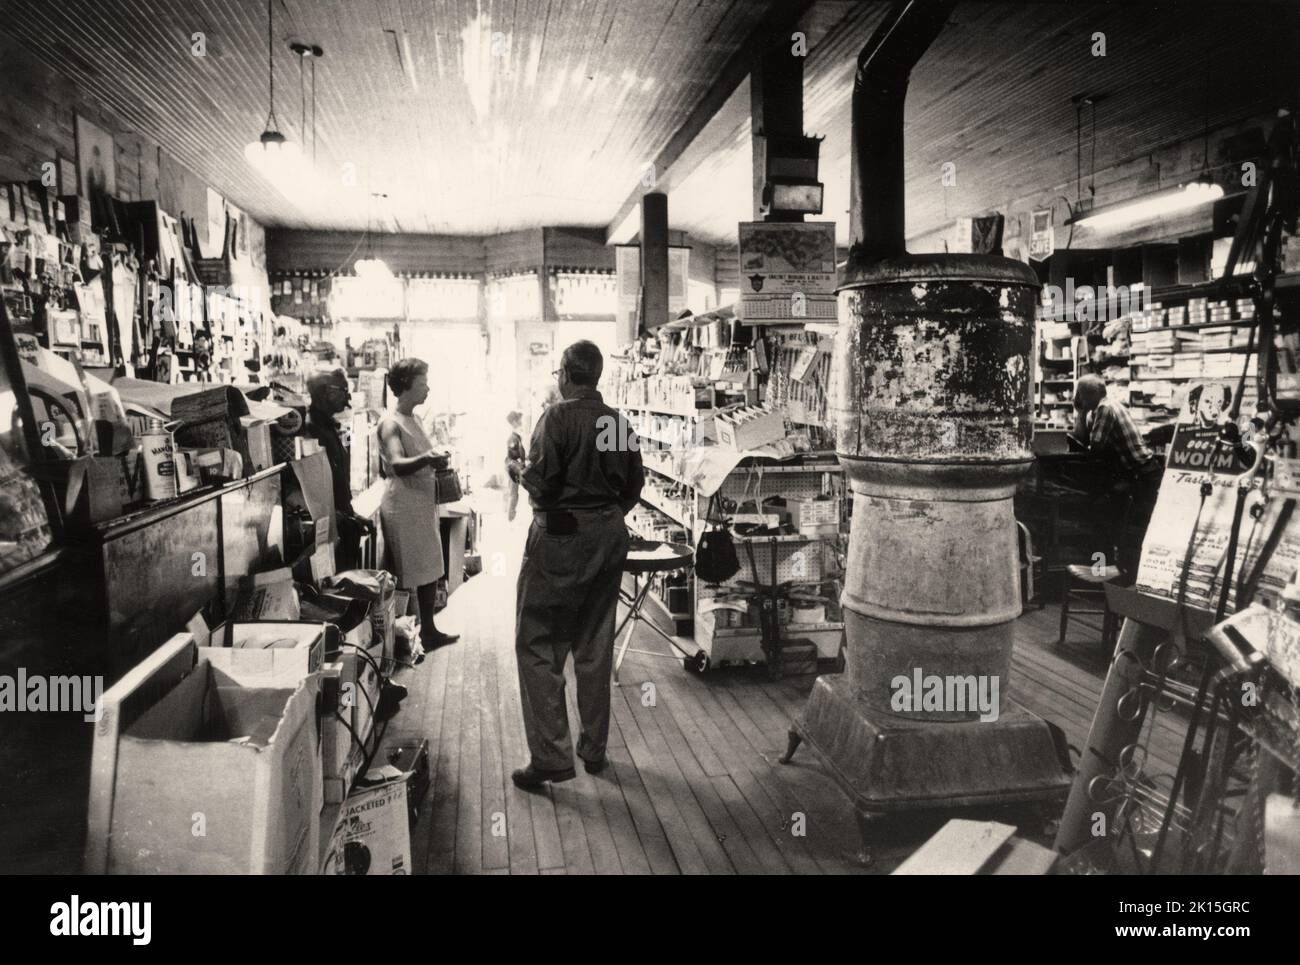 The Mast General Store, Valle Crucis, NC, in 1963. It is still operating today, into the 21st century. It is located in the Blue Ridge Mountains, near Boone, and is a favorite tourist destination. Stock Photo